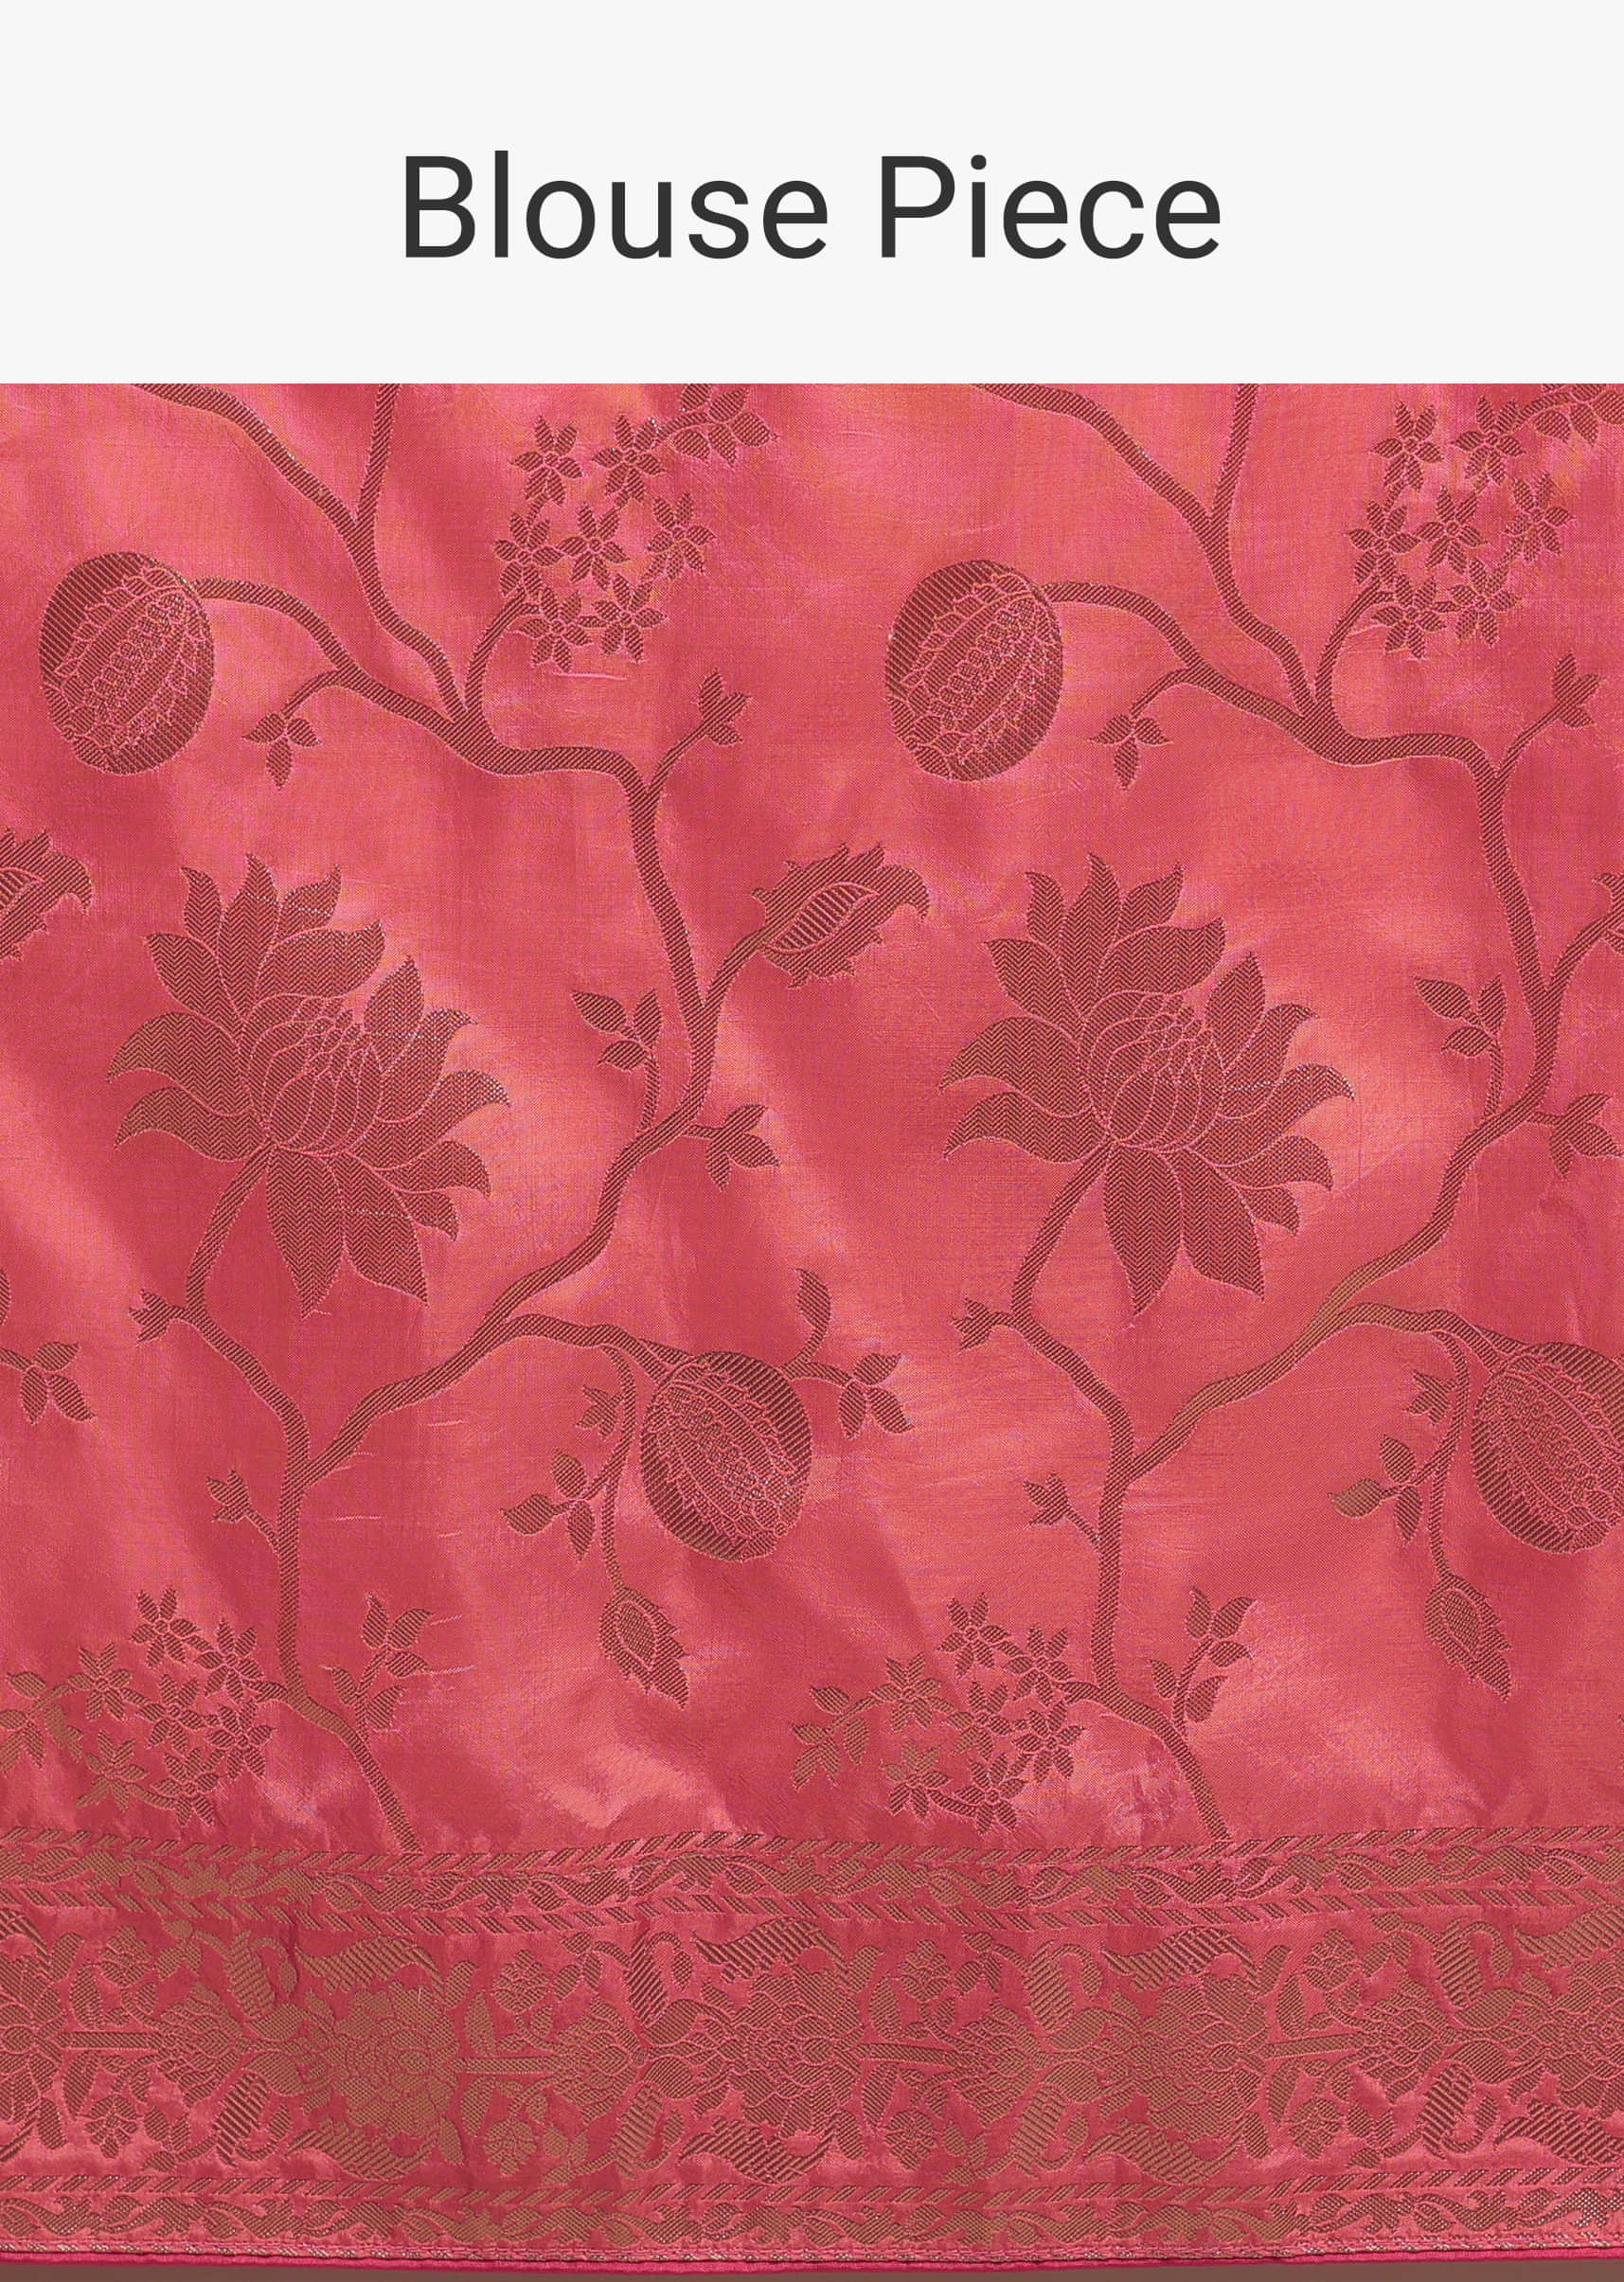 Salmon Pink Saree In Silk With Woven Floral Jaal And Intricate Floral Border